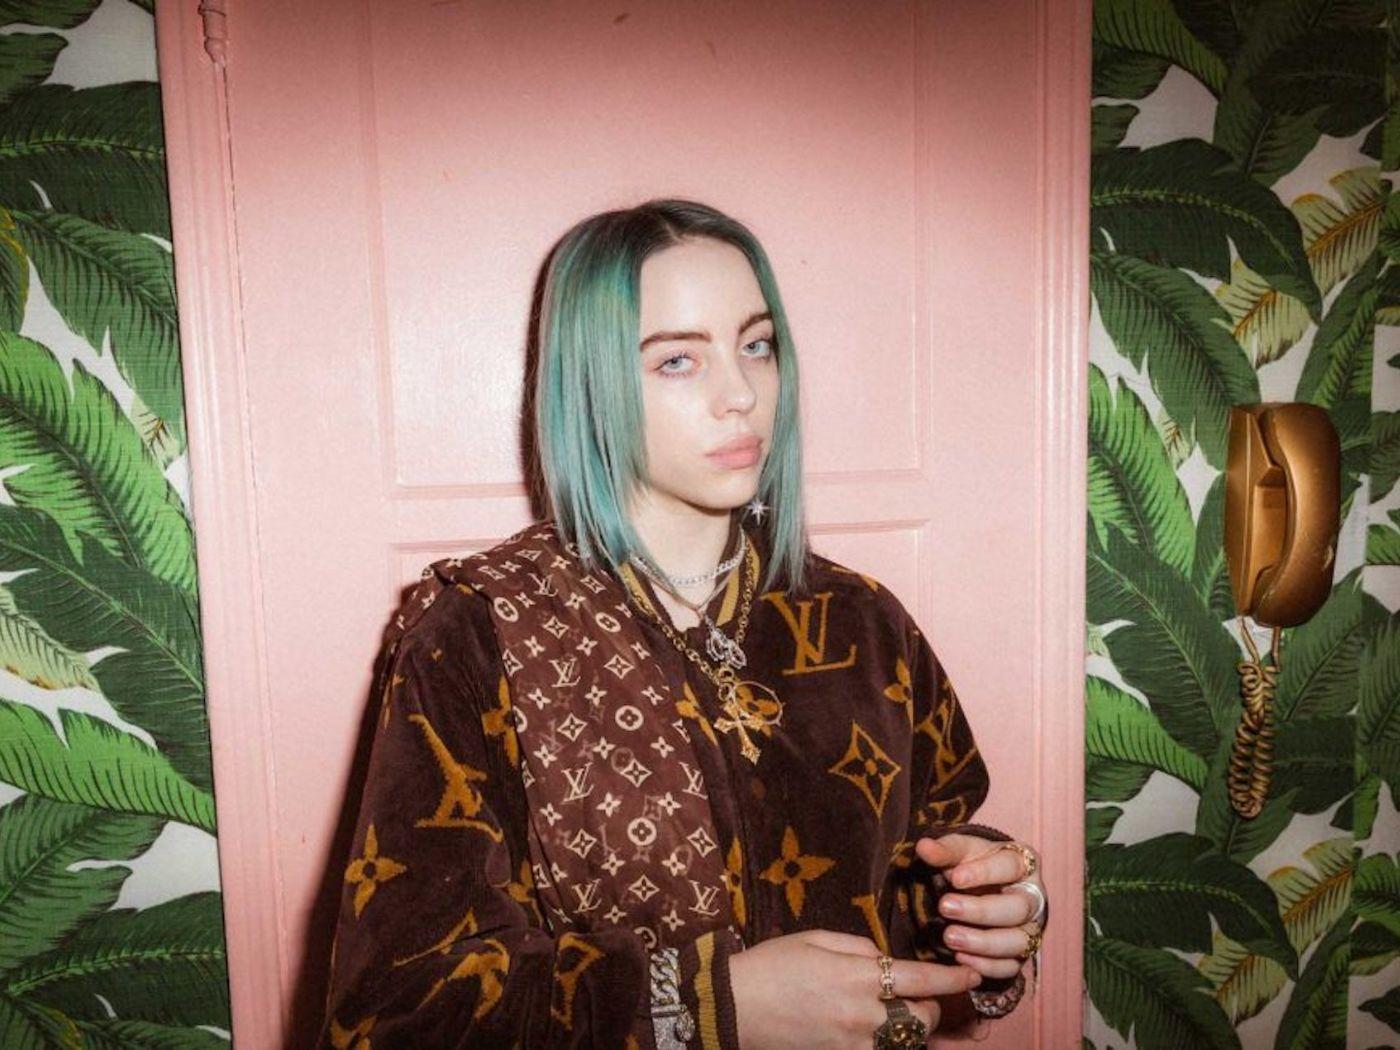 Billie Eilish's 'Everything I Wanted' is a beautiful